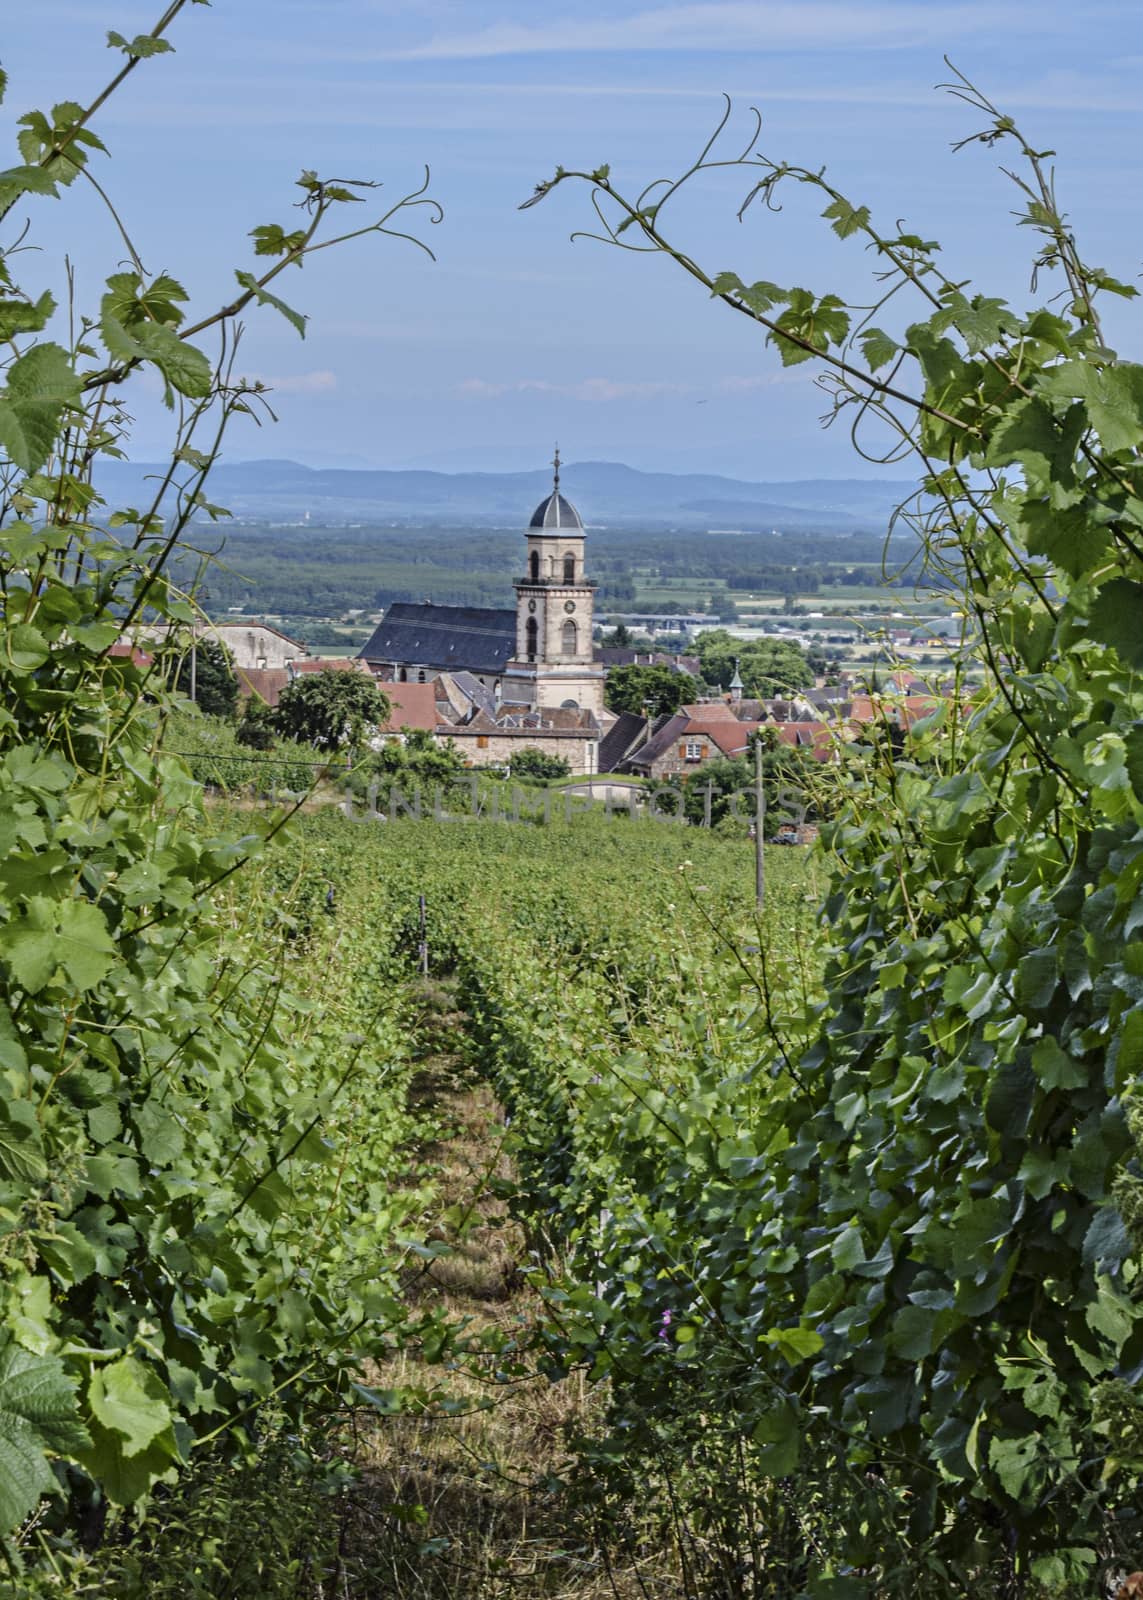 France, Alsace, June 2015 - view of traditional village from between rows of grape vines - portrait